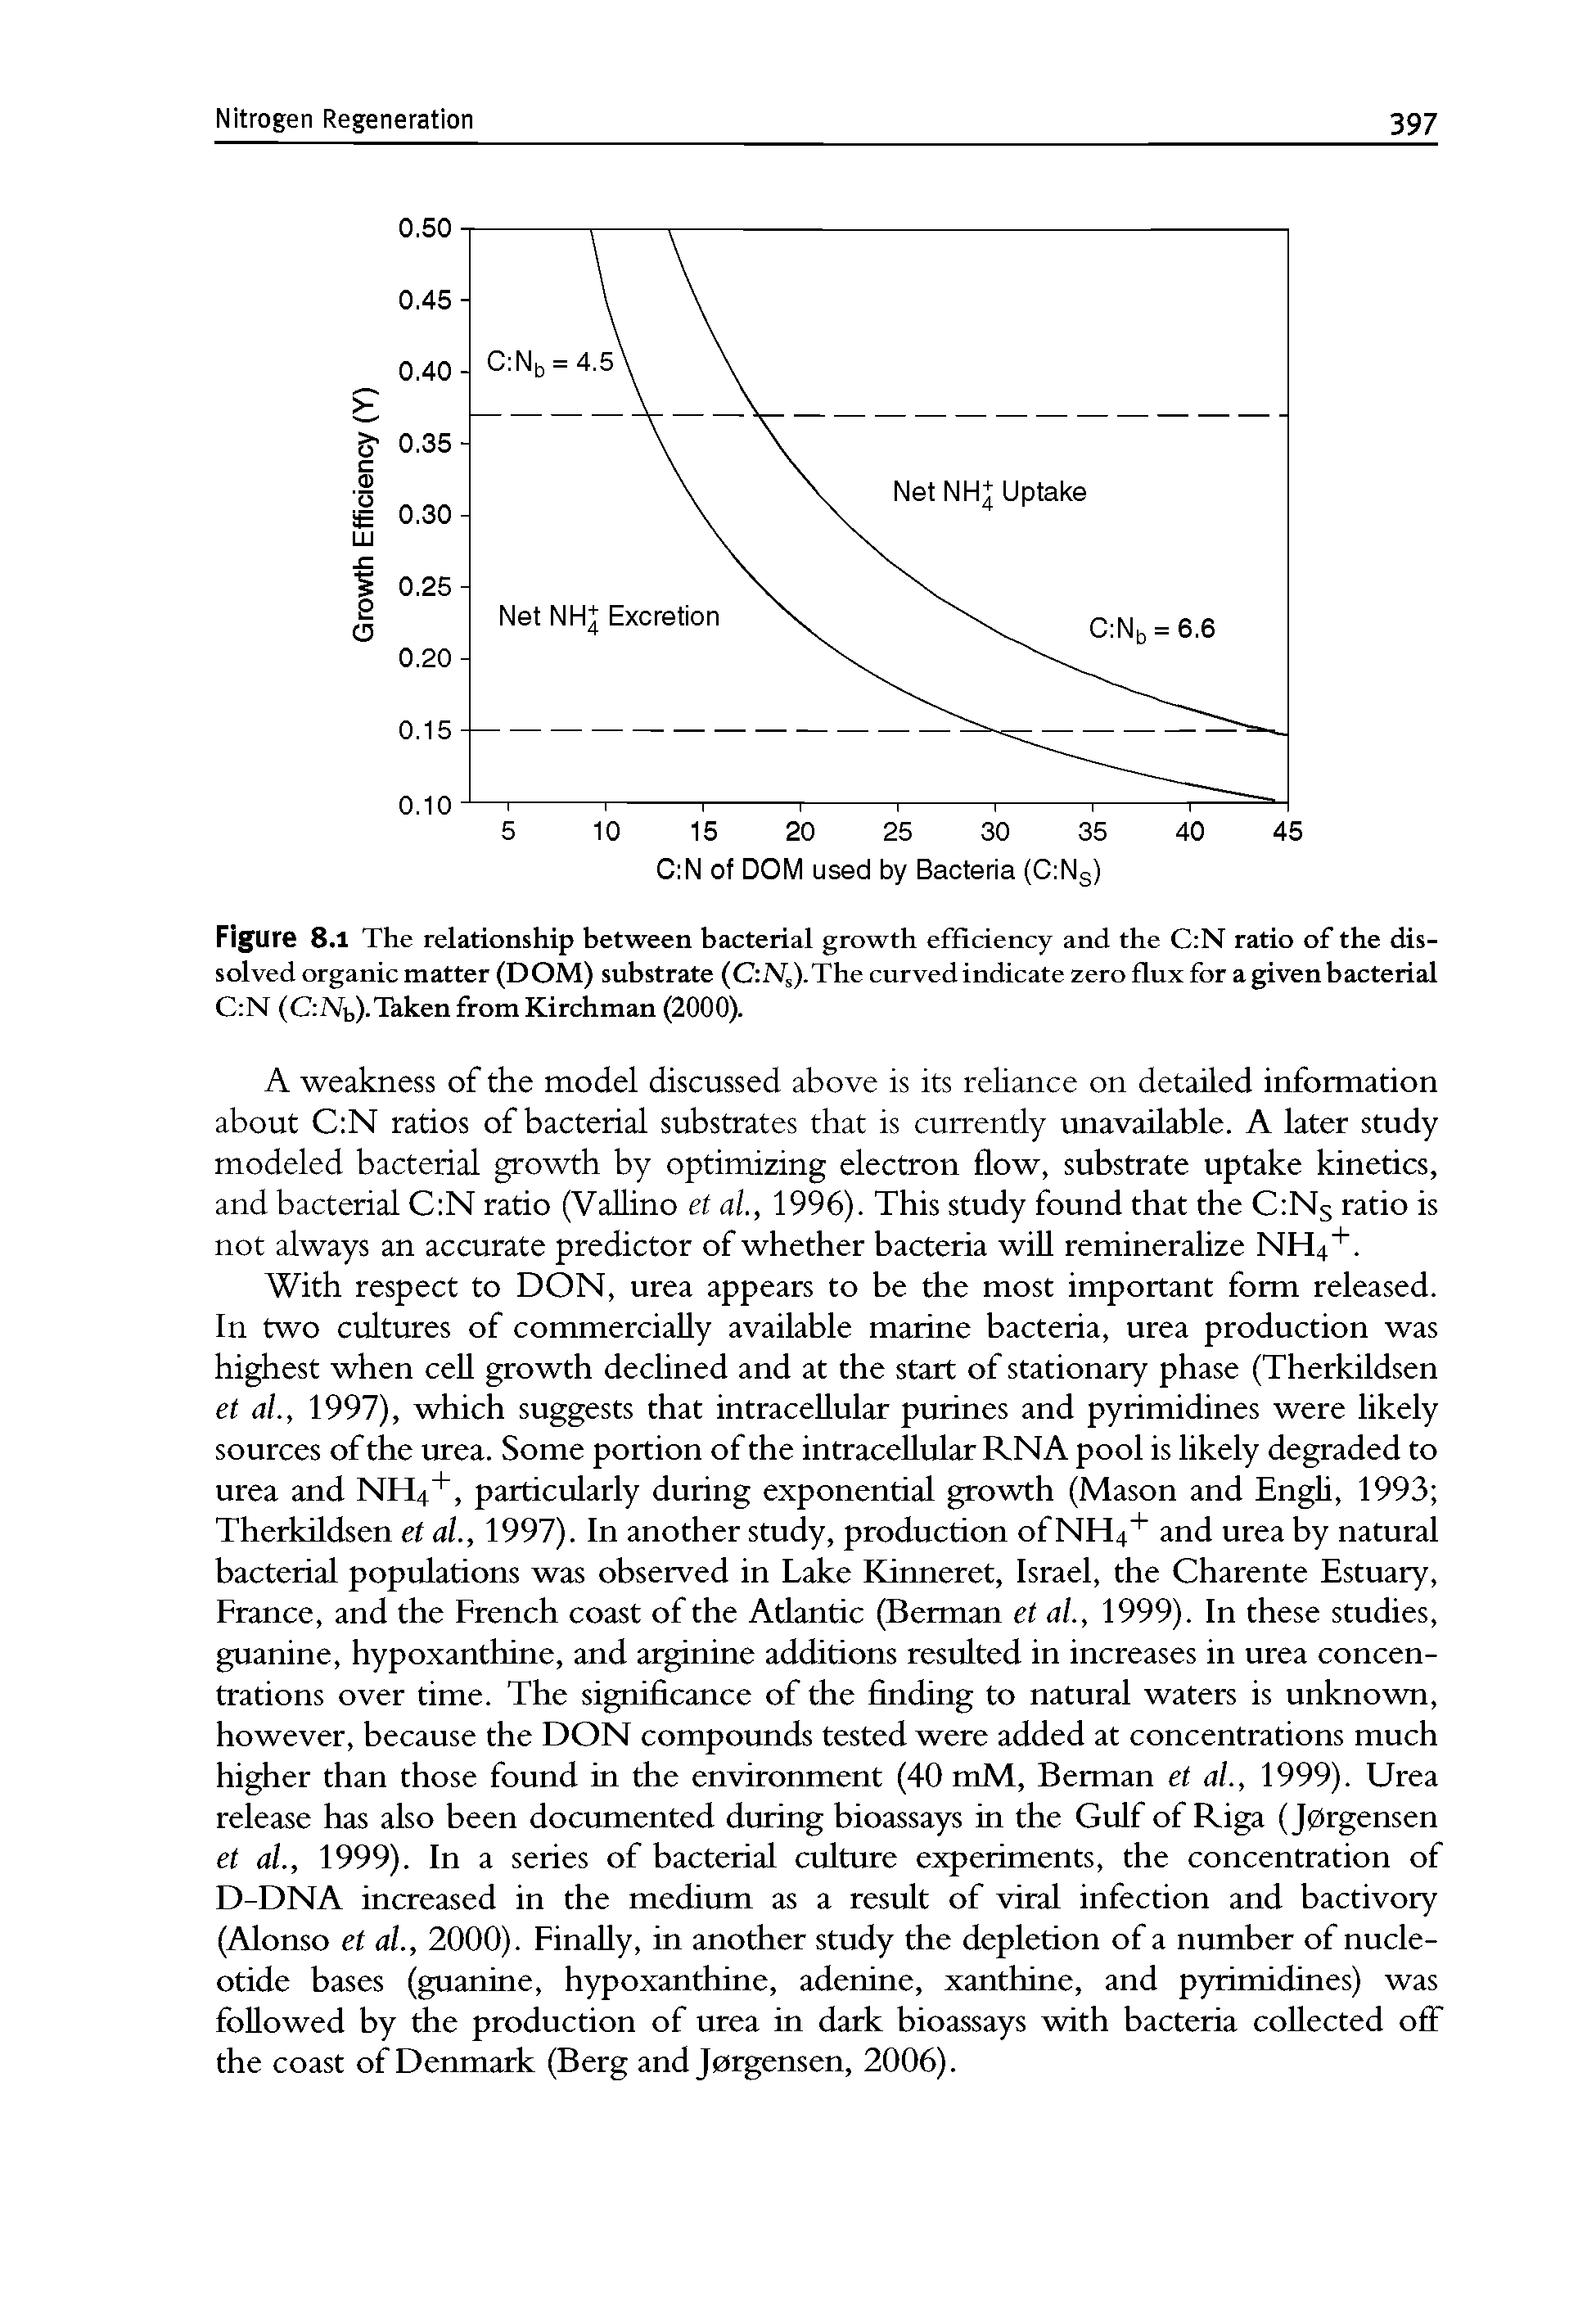 Figure 8.1 The relationship between bacterial growth efficiency and the C N ratio of the dissolved organic matter (DOM) substrate (C Ns).The curved indicate zero flux for a given bacterial C N (C Nb).Taken from Kirchman (2000).